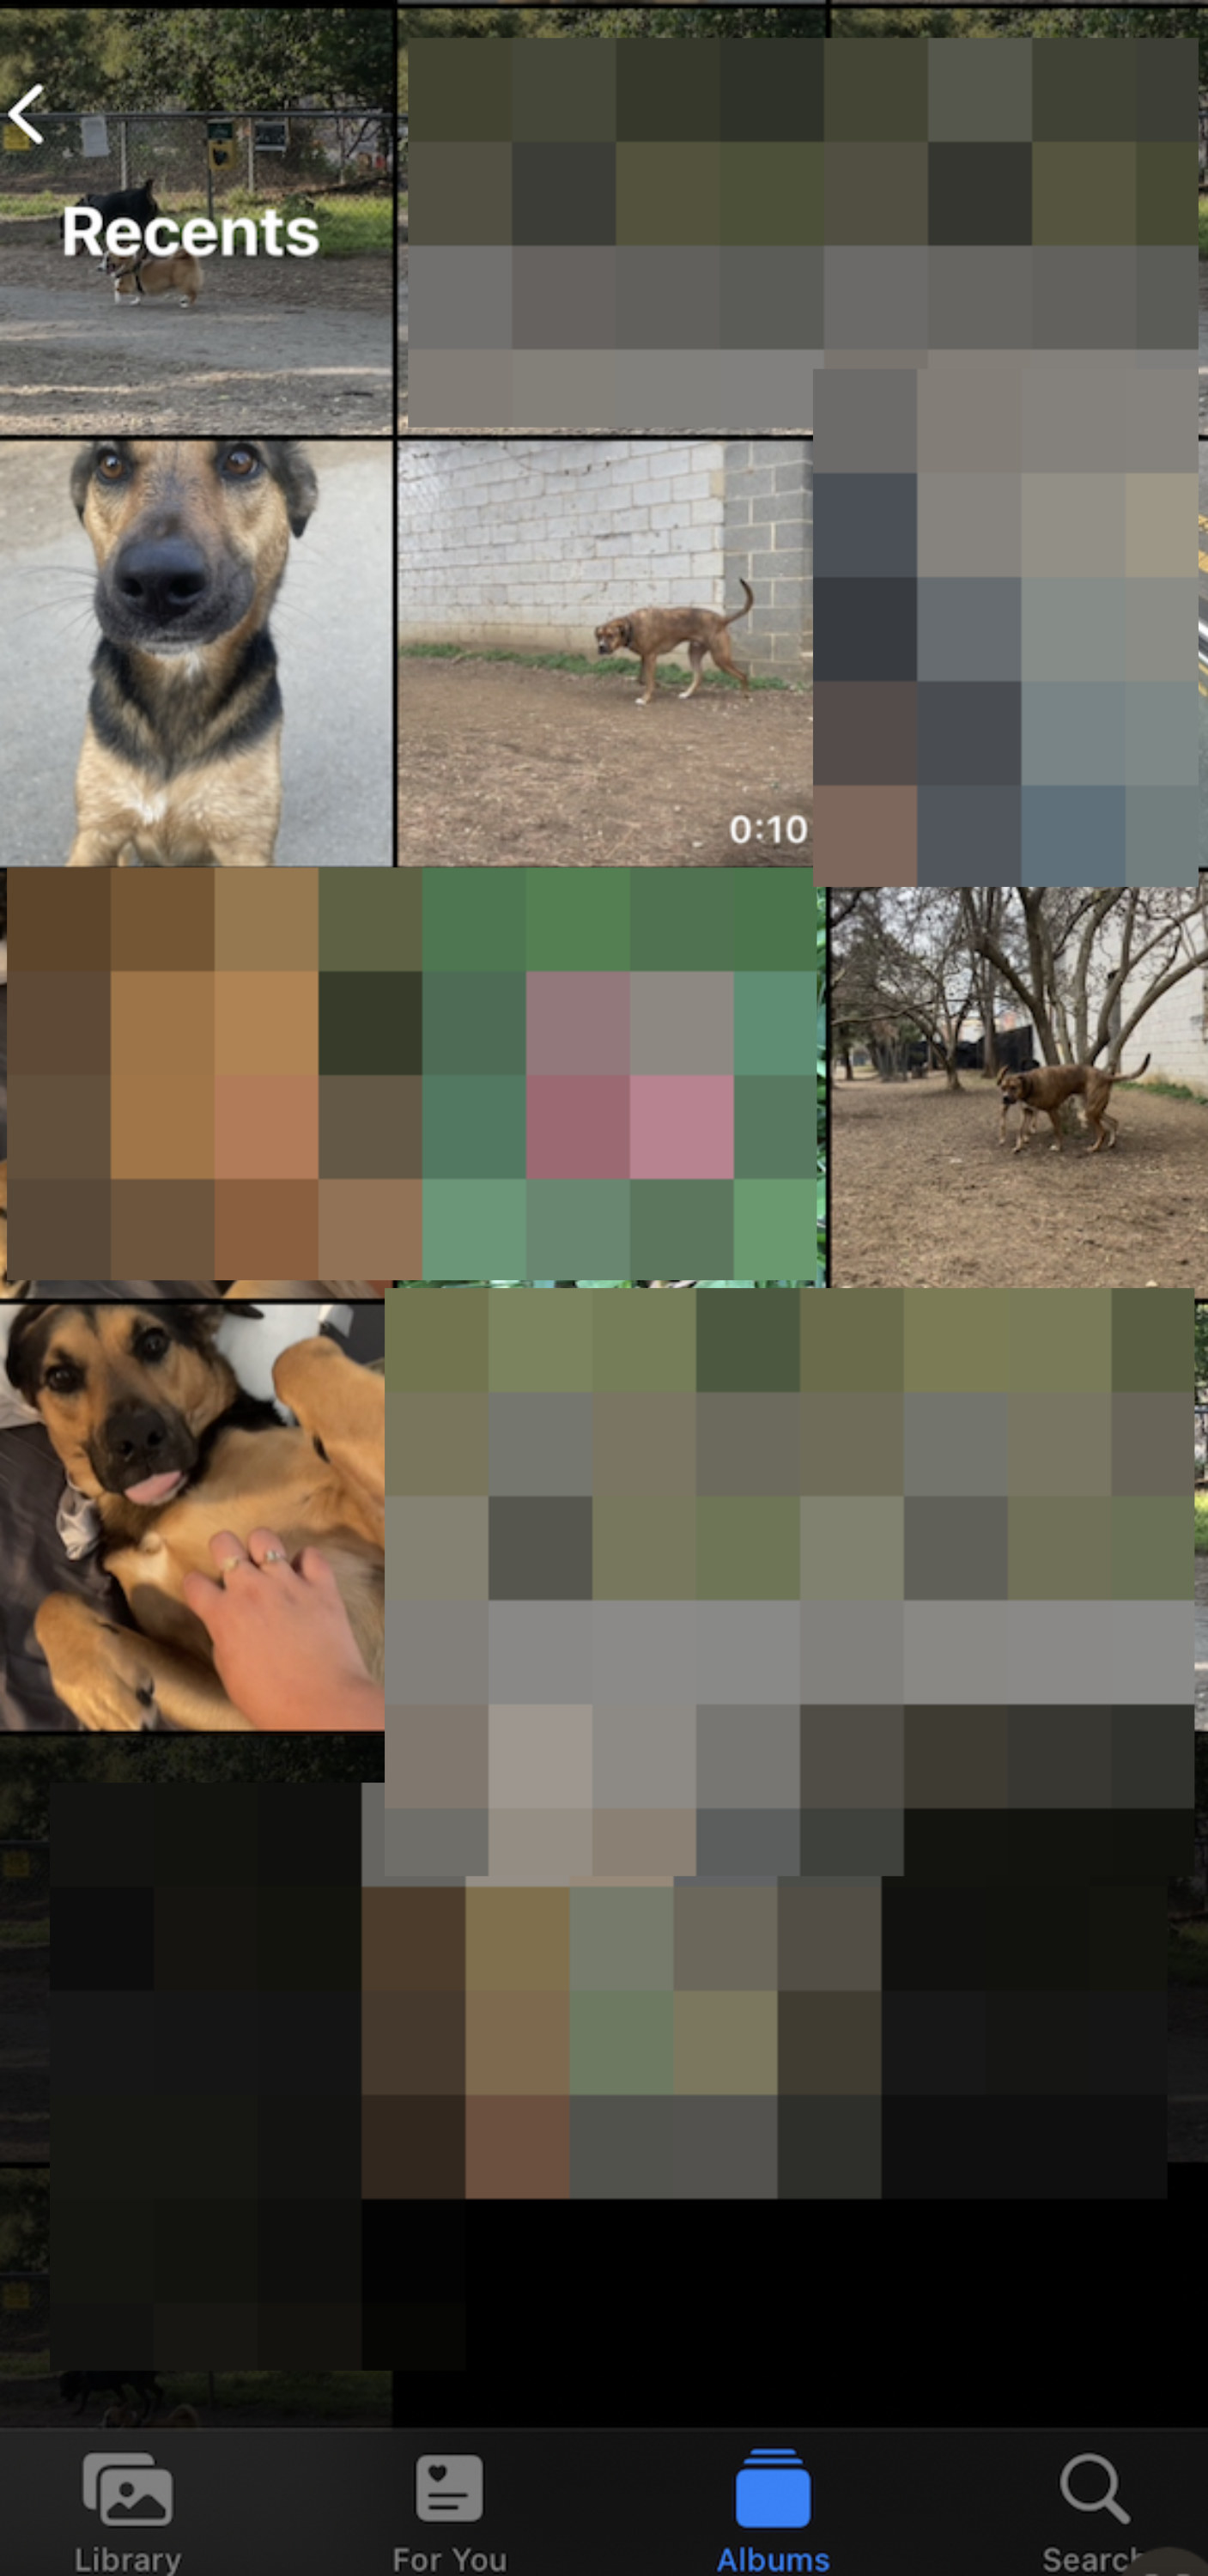 A camera roll with images of dogs and blurred out images of dog poo